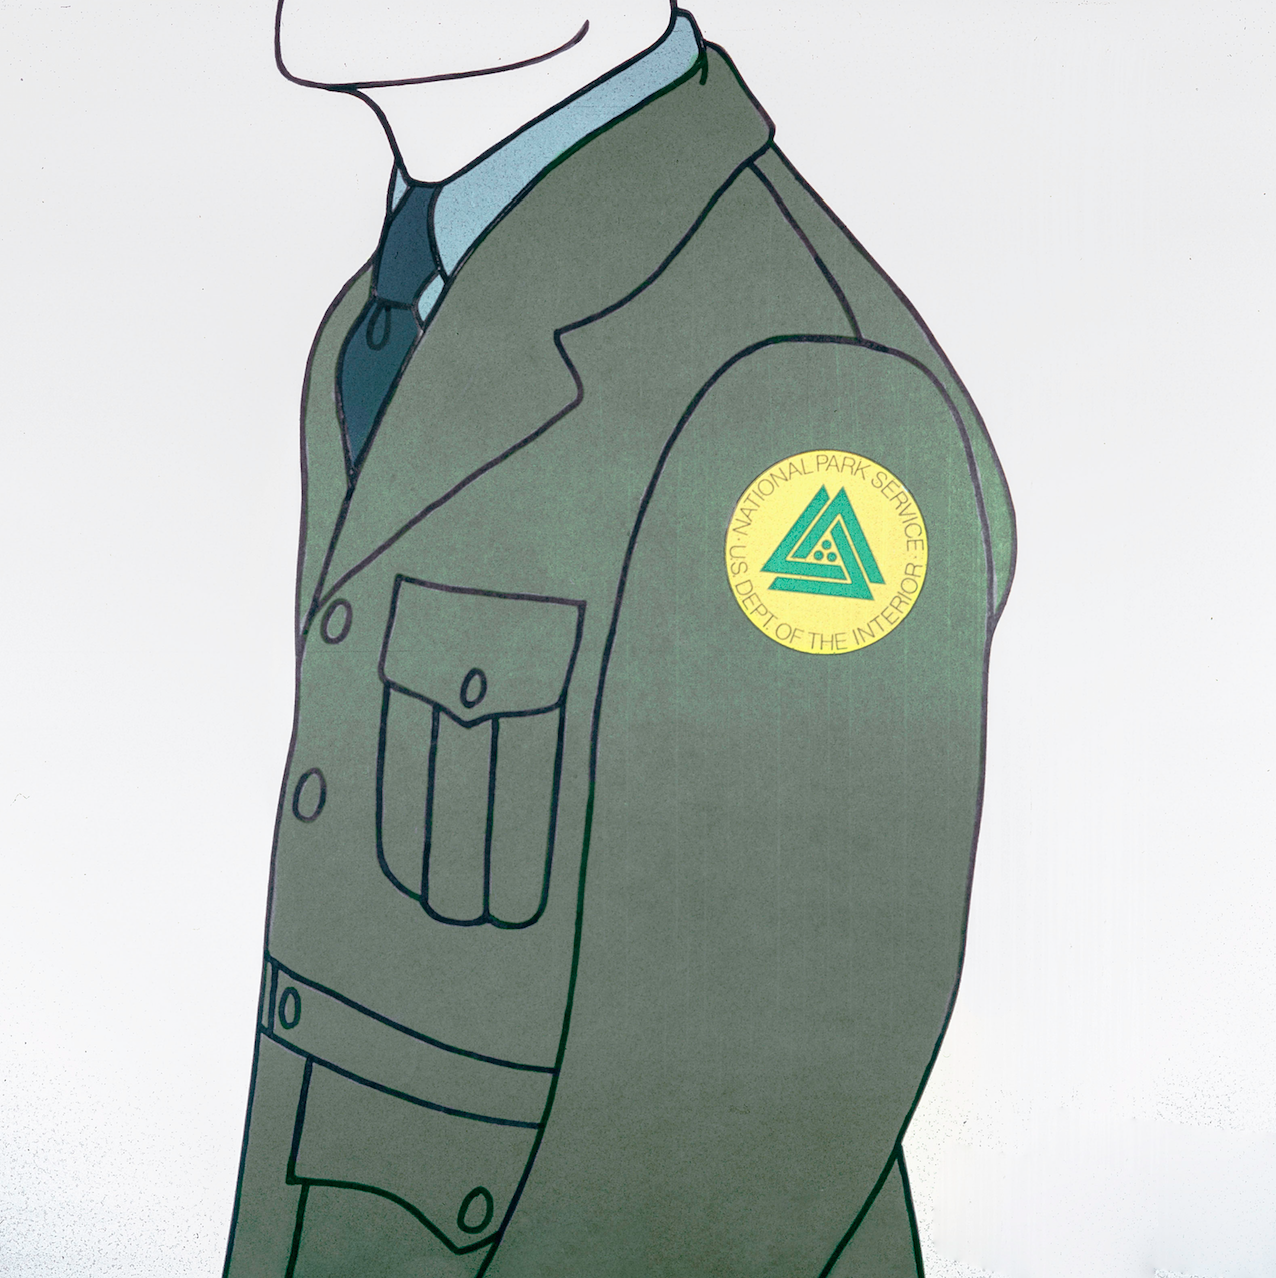 Color drawing featuring a round yellow patch on a green uniform sleeve